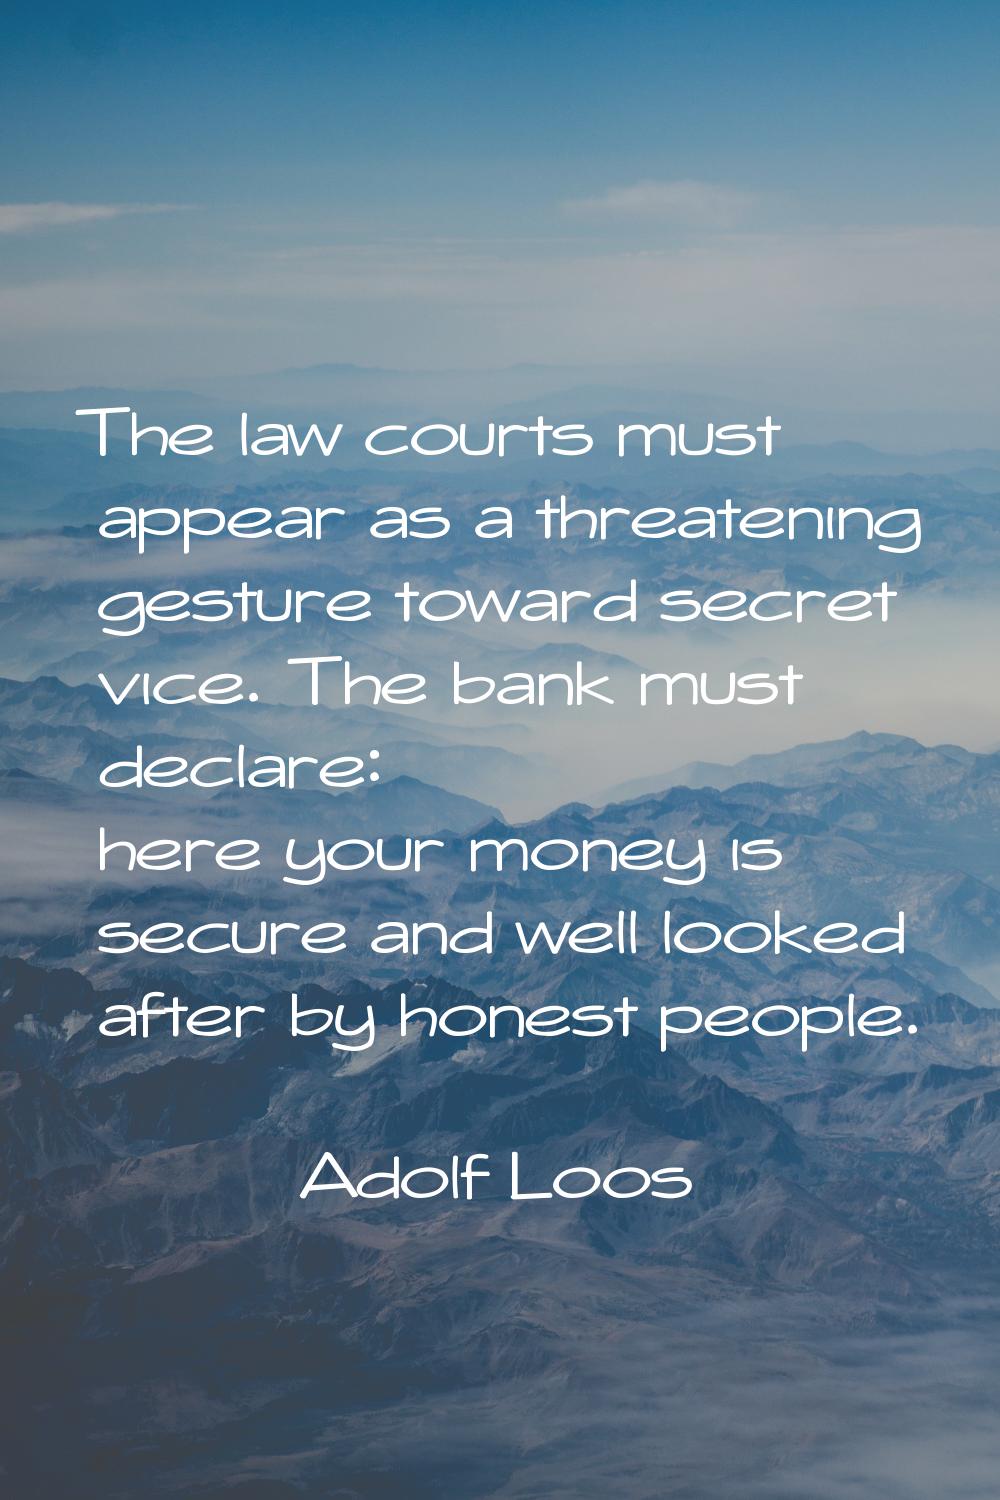 The law courts must appear as a threatening gesture toward secret vice. The bank must declare: here